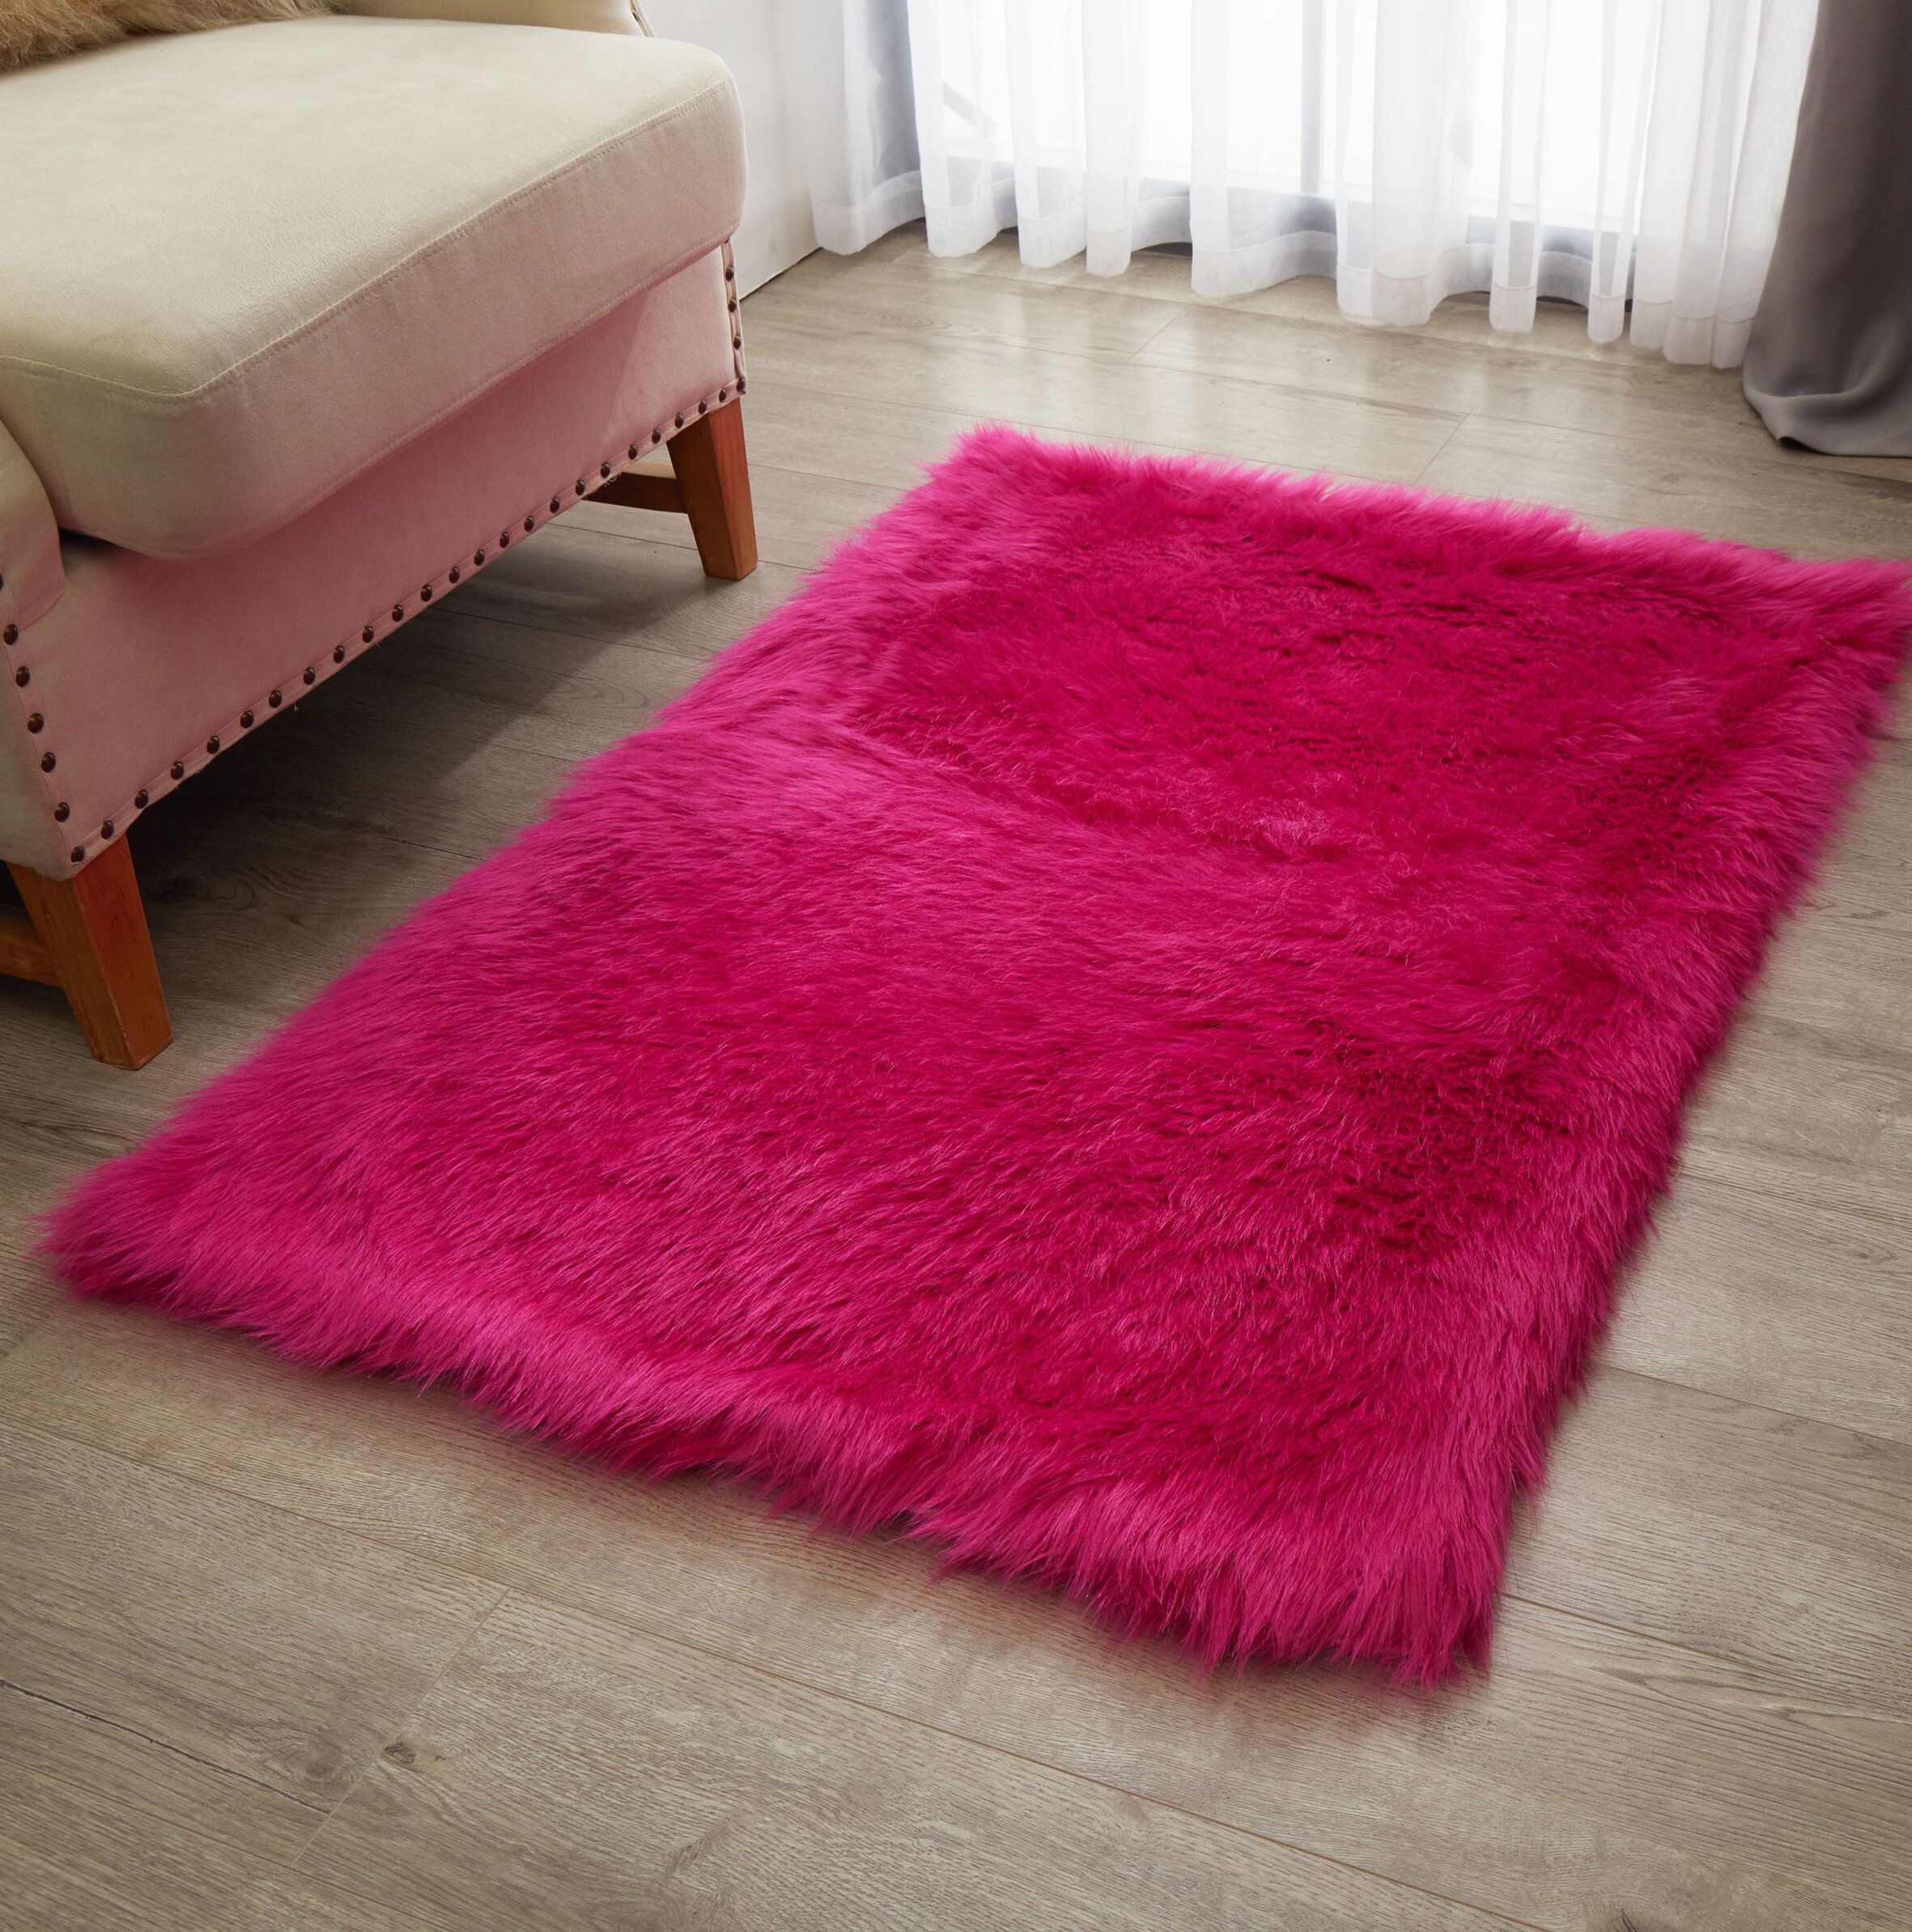 Everly Quinn Thurmont Faux Fur Pink Rug & Reviews | Wayfair For Pink Soft Touch Shag Rugs (View 8 of 15)